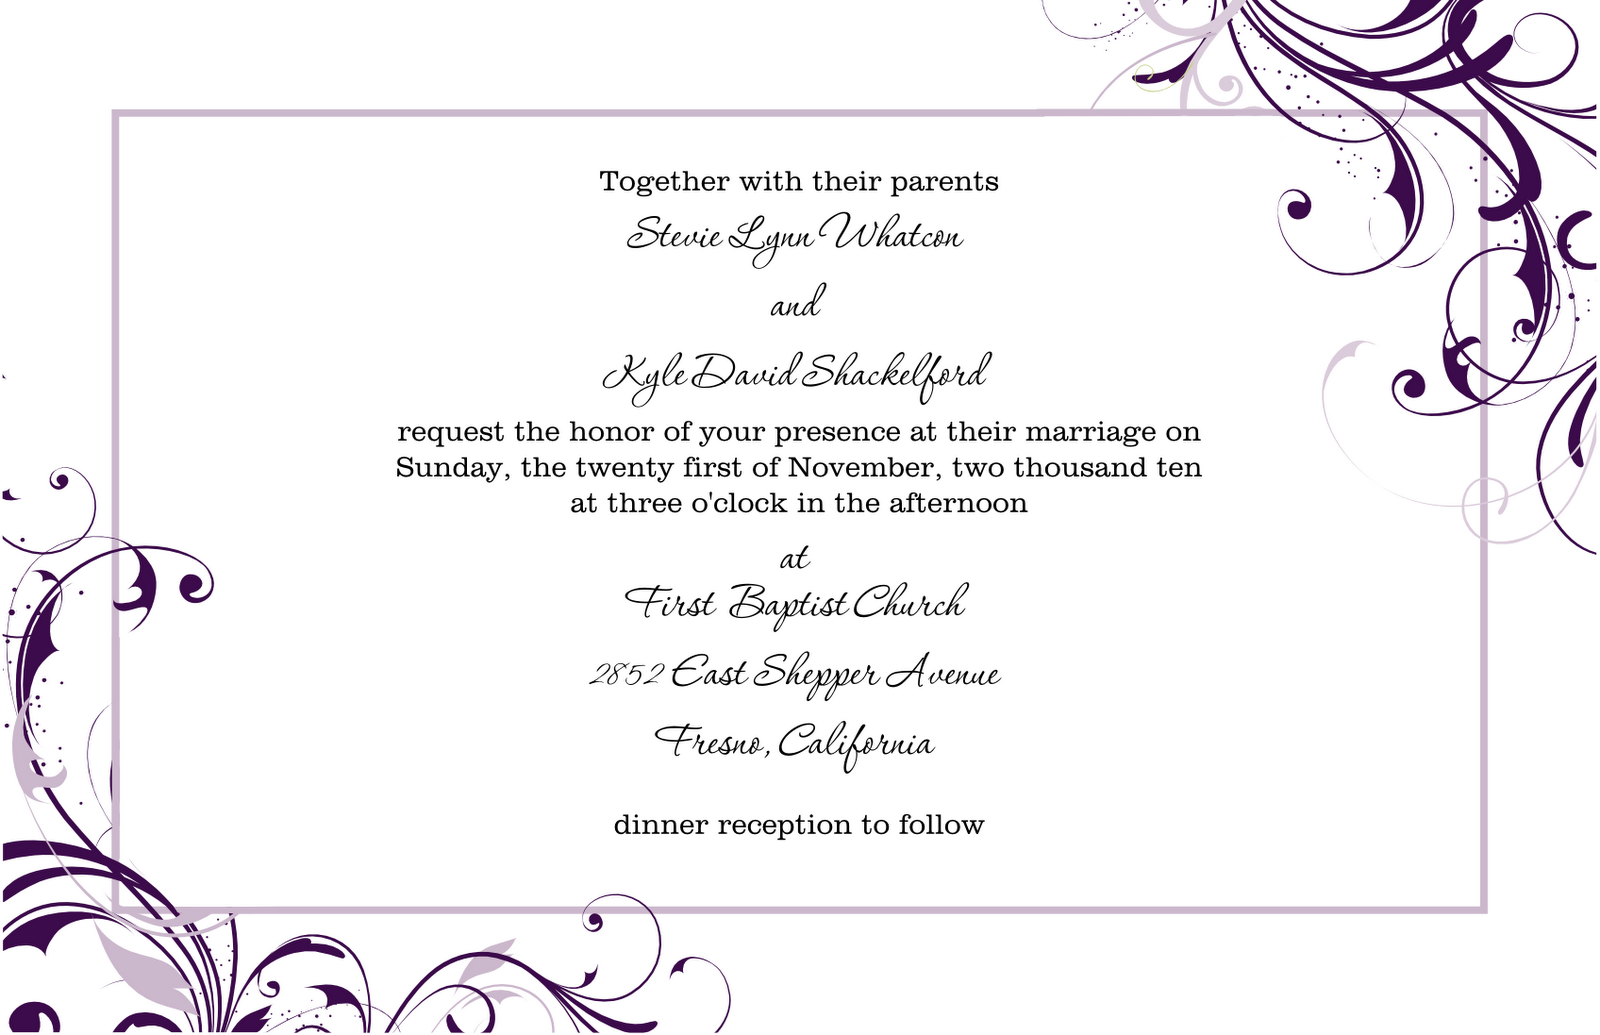 Wedding invitation Template Microsoft Word Paper - invitation png With Regard To Free Dinner Invitation Templates For Word